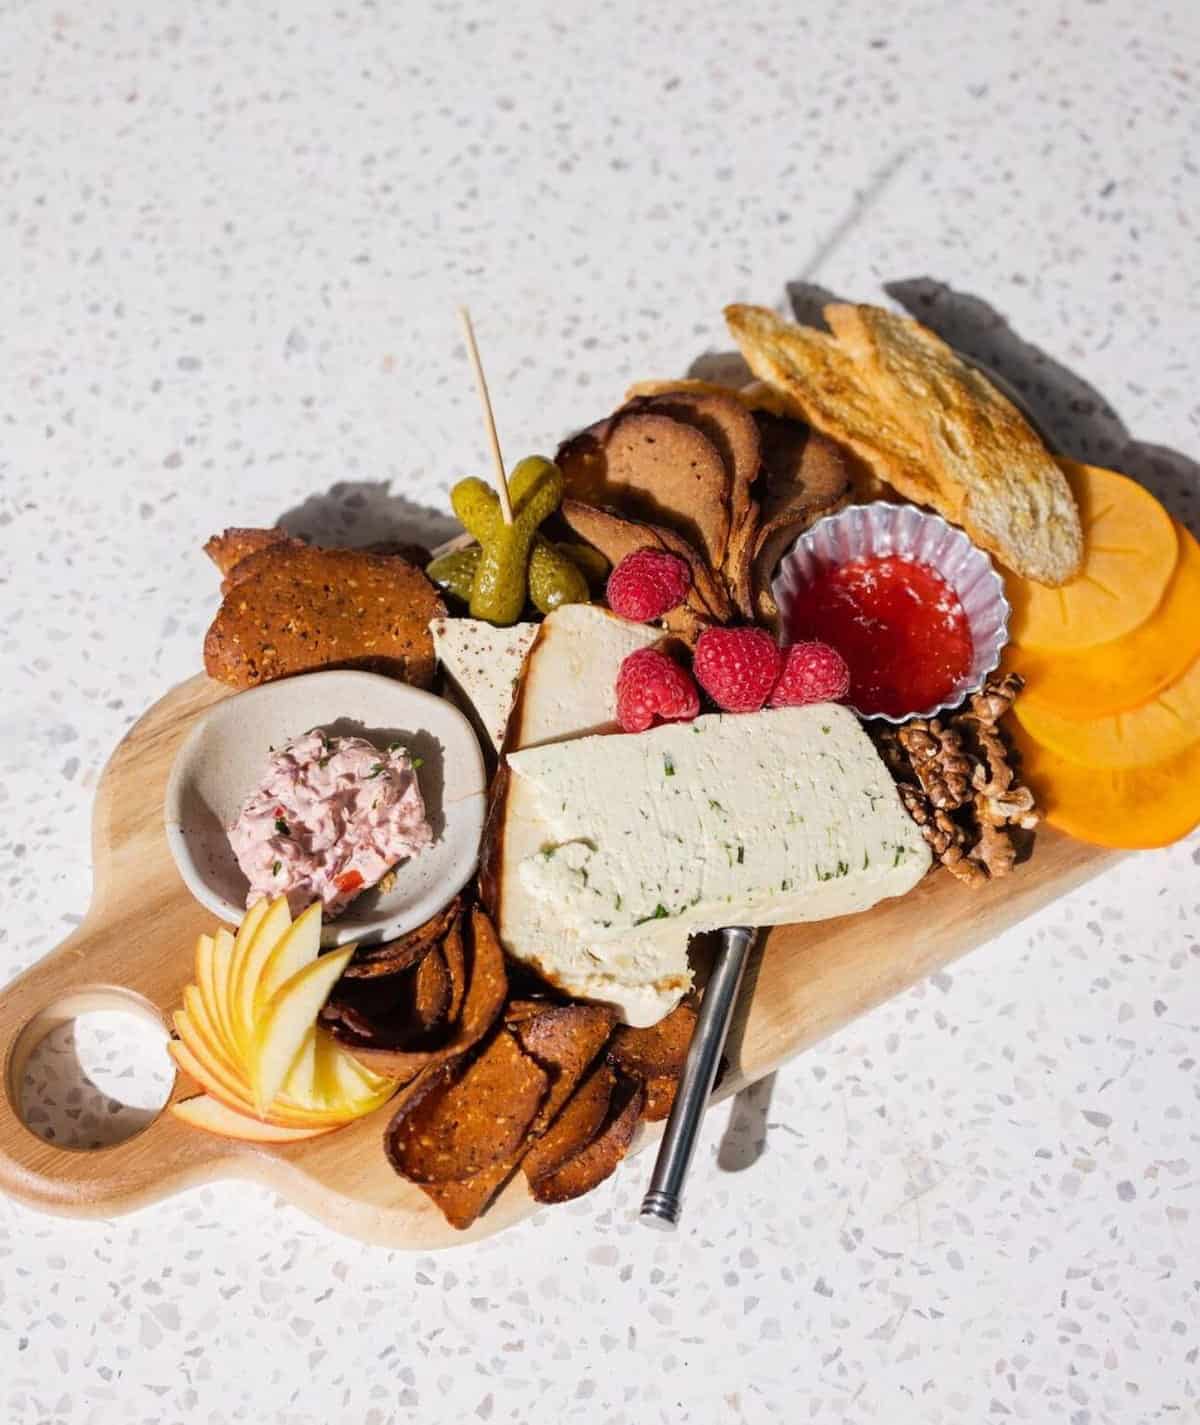 A vegan charcuterie from Fortune in Portland.